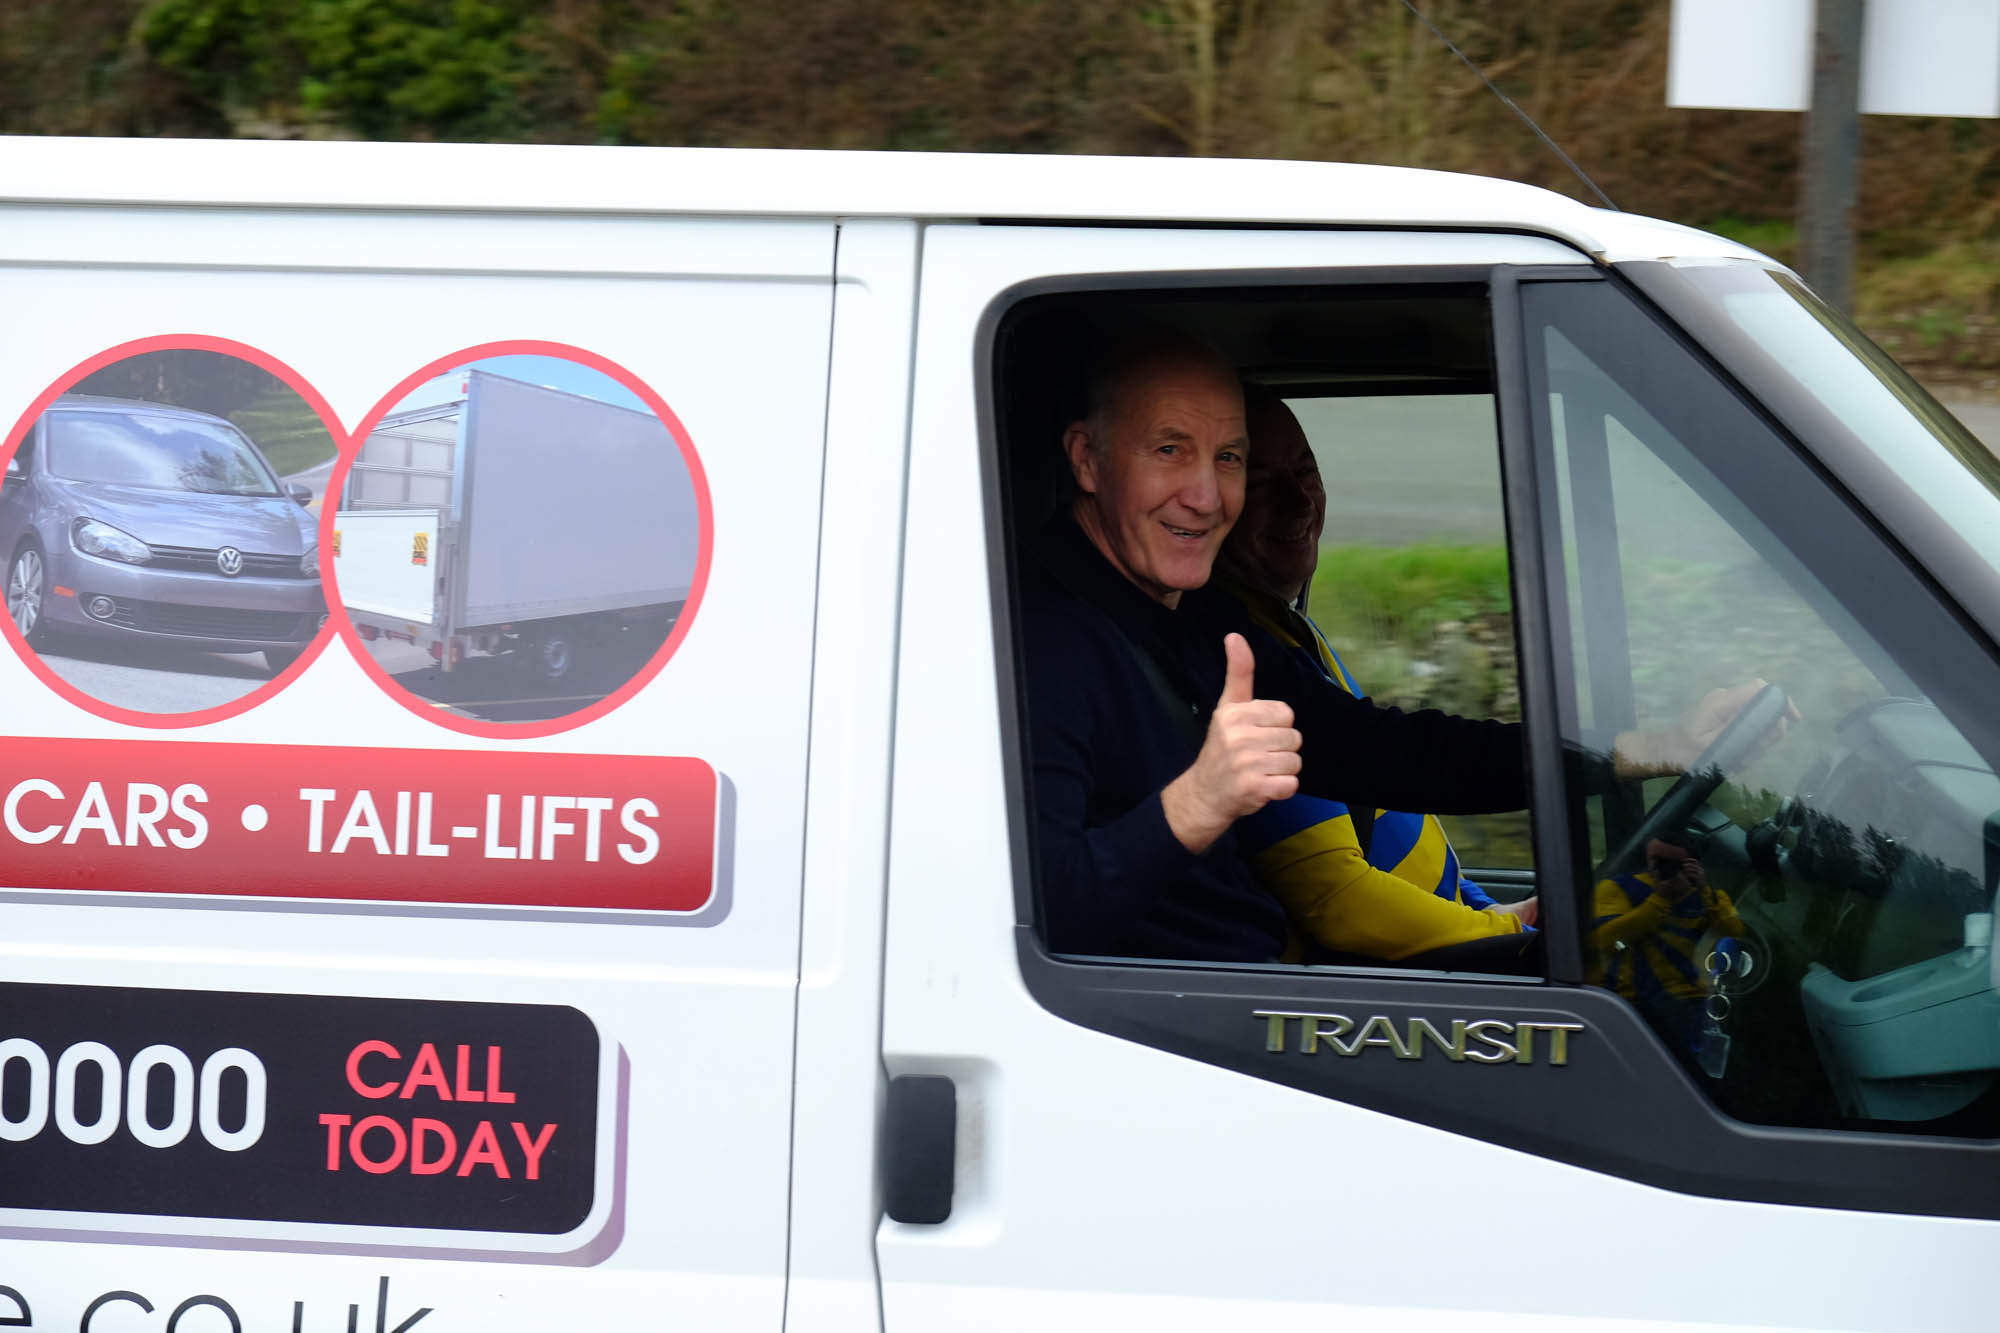 Grim Rimmer in the broom wagon brings up the rear. Smiling happily at his task...